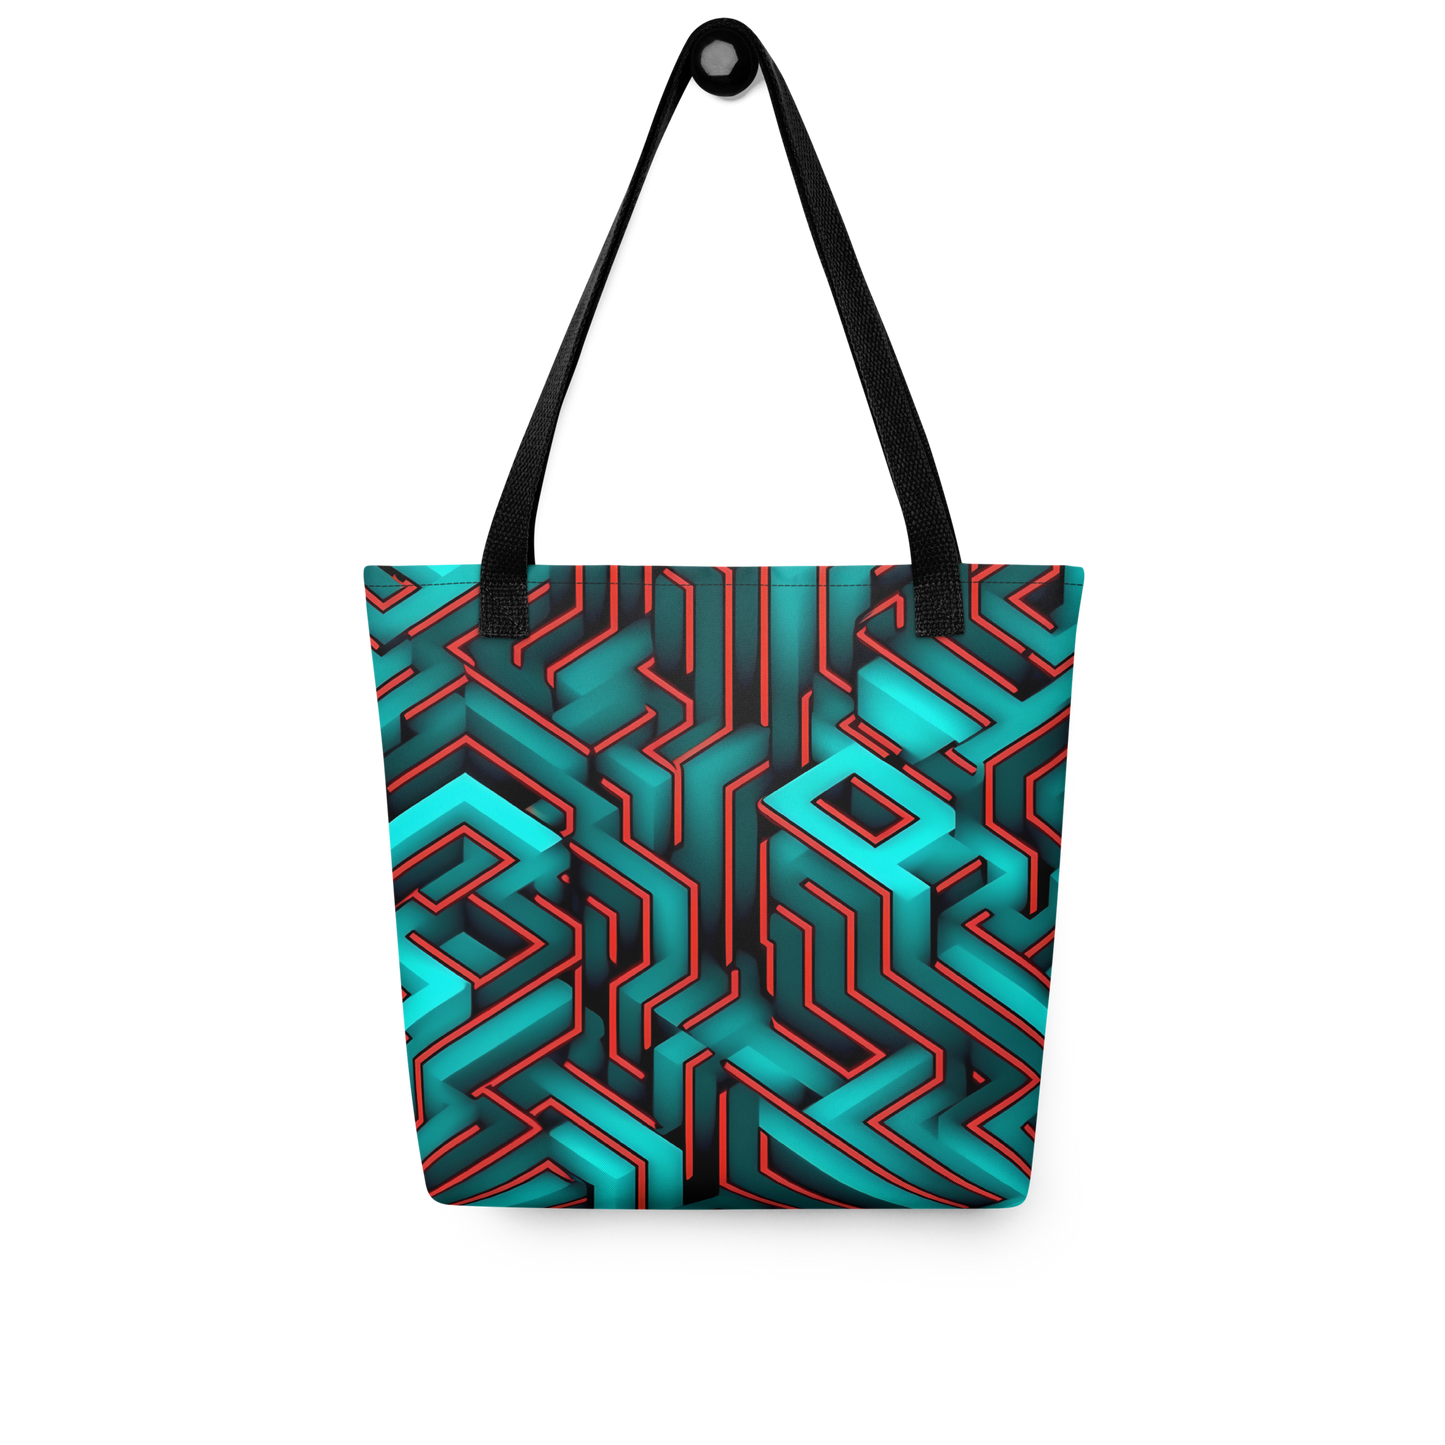 3D Maze Illusion | 3D Patterns | All-Over Print Tote - #2